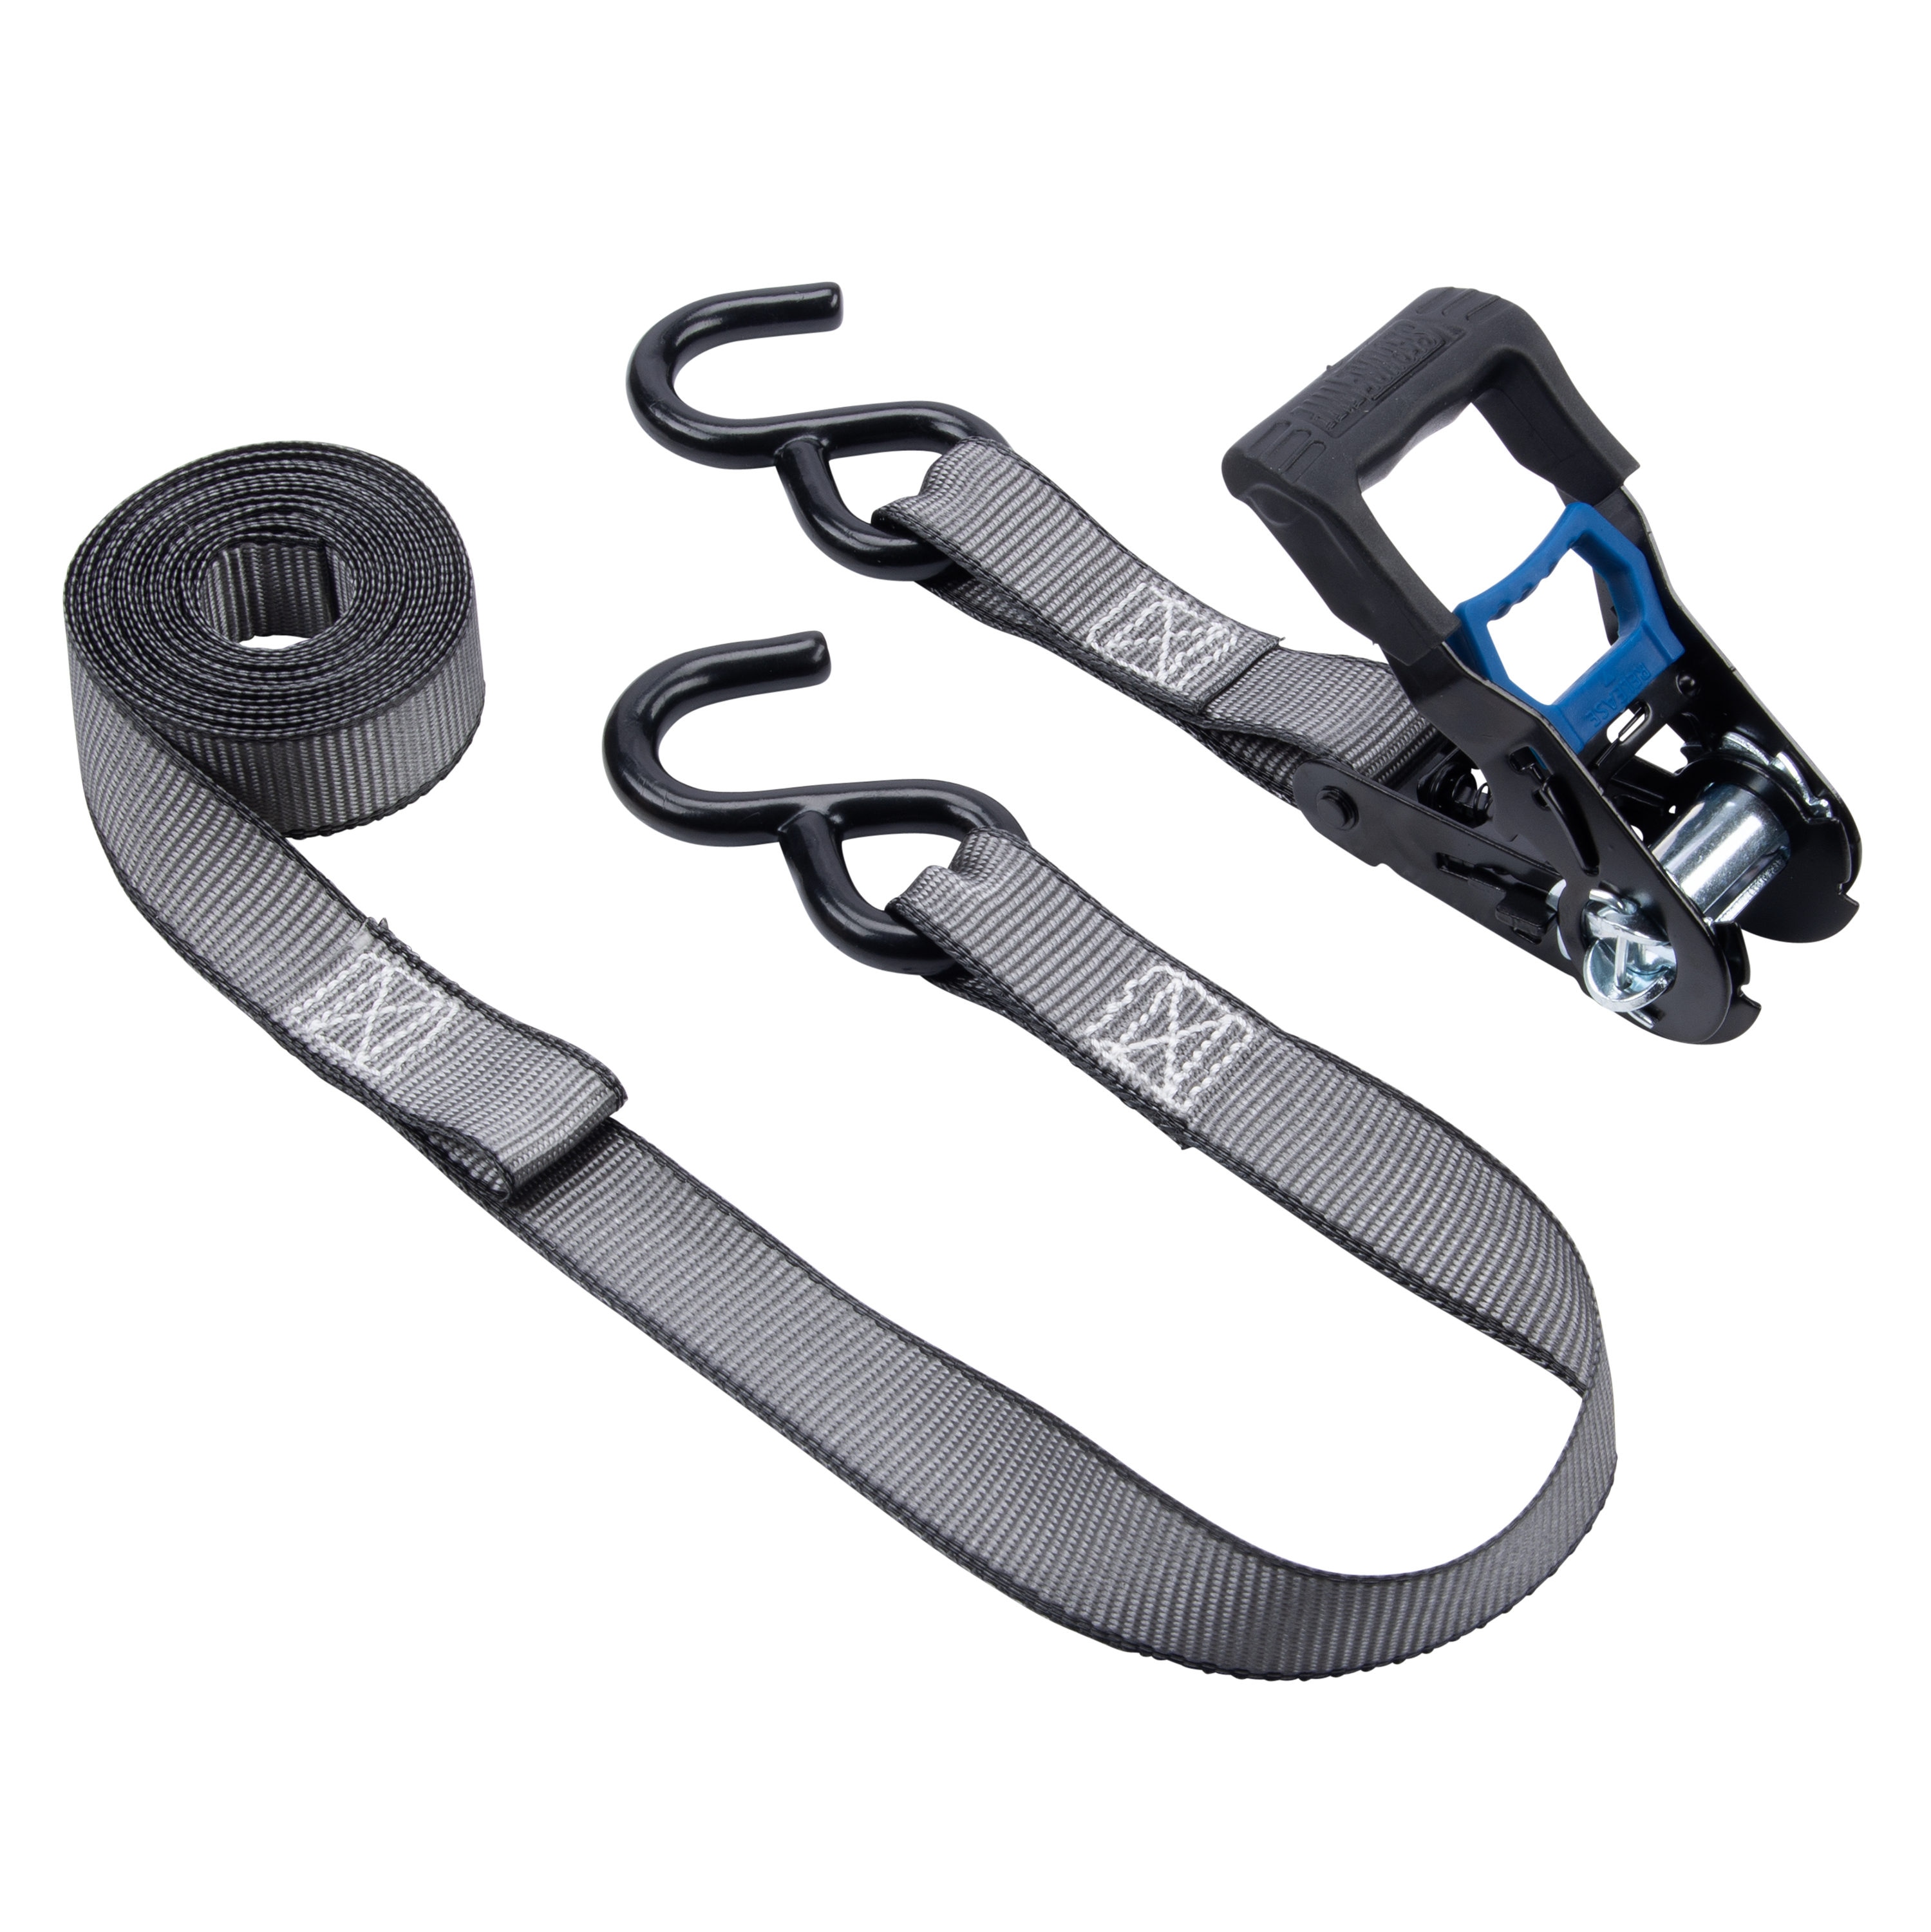 Secure Tite Cam Tie Down 4-Pack 300-lbs at